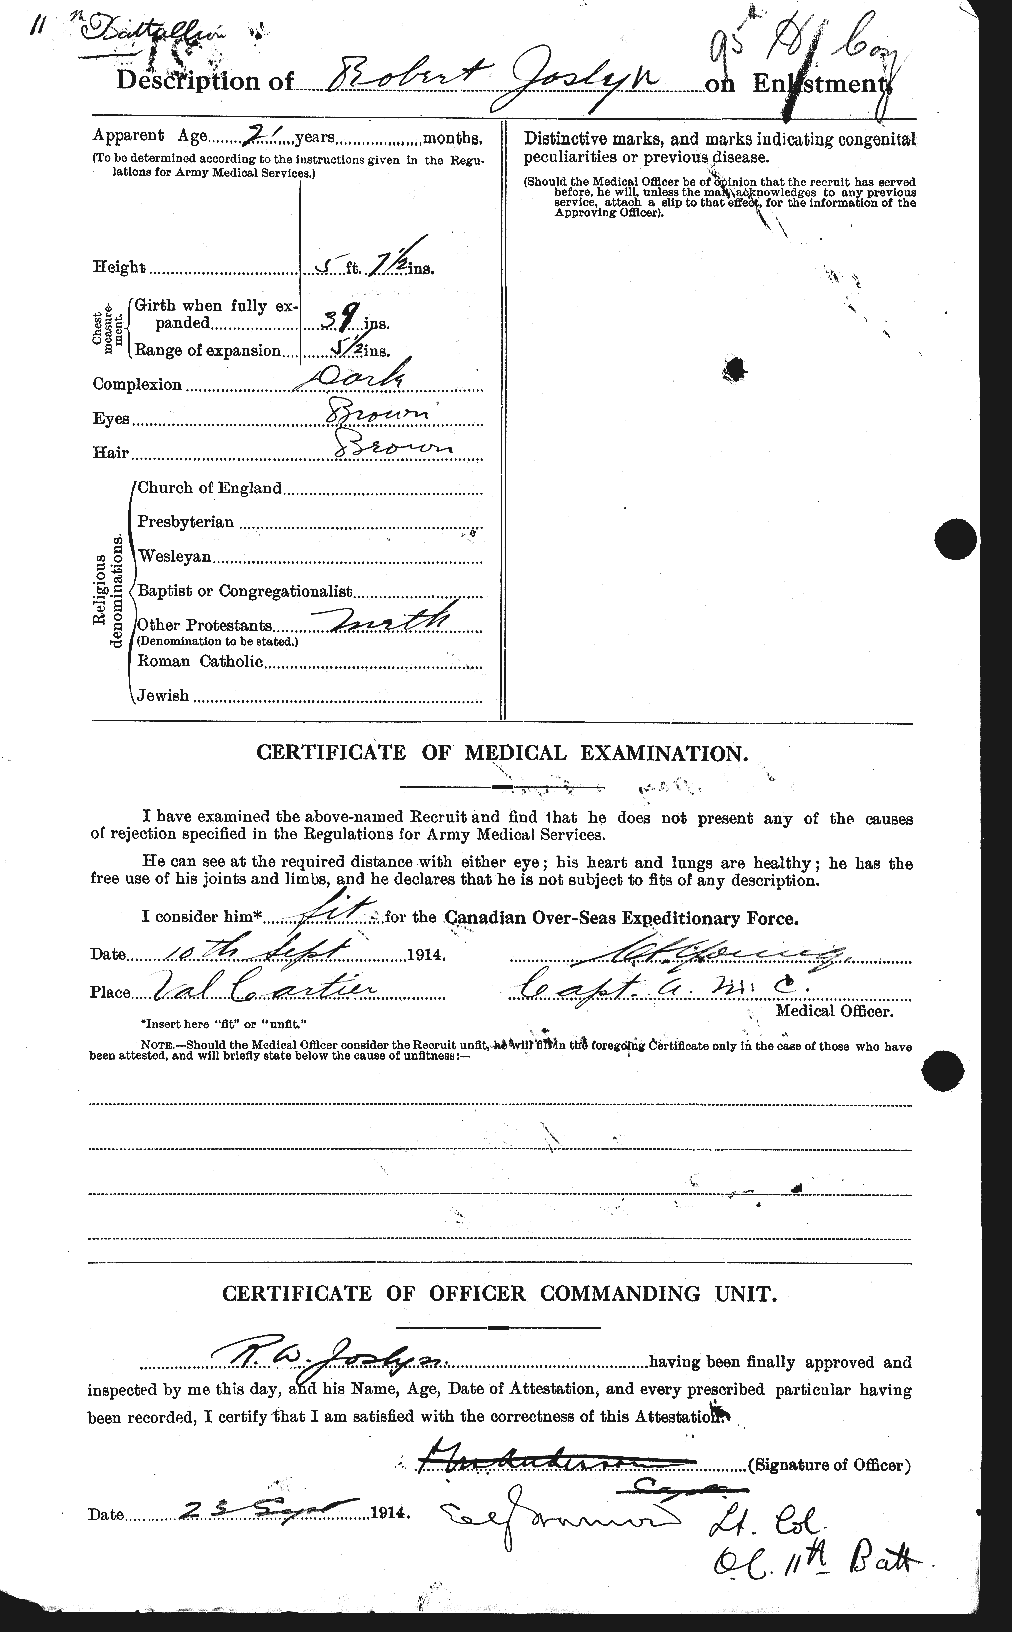 Personnel Records of the First World War - CEF 426178b